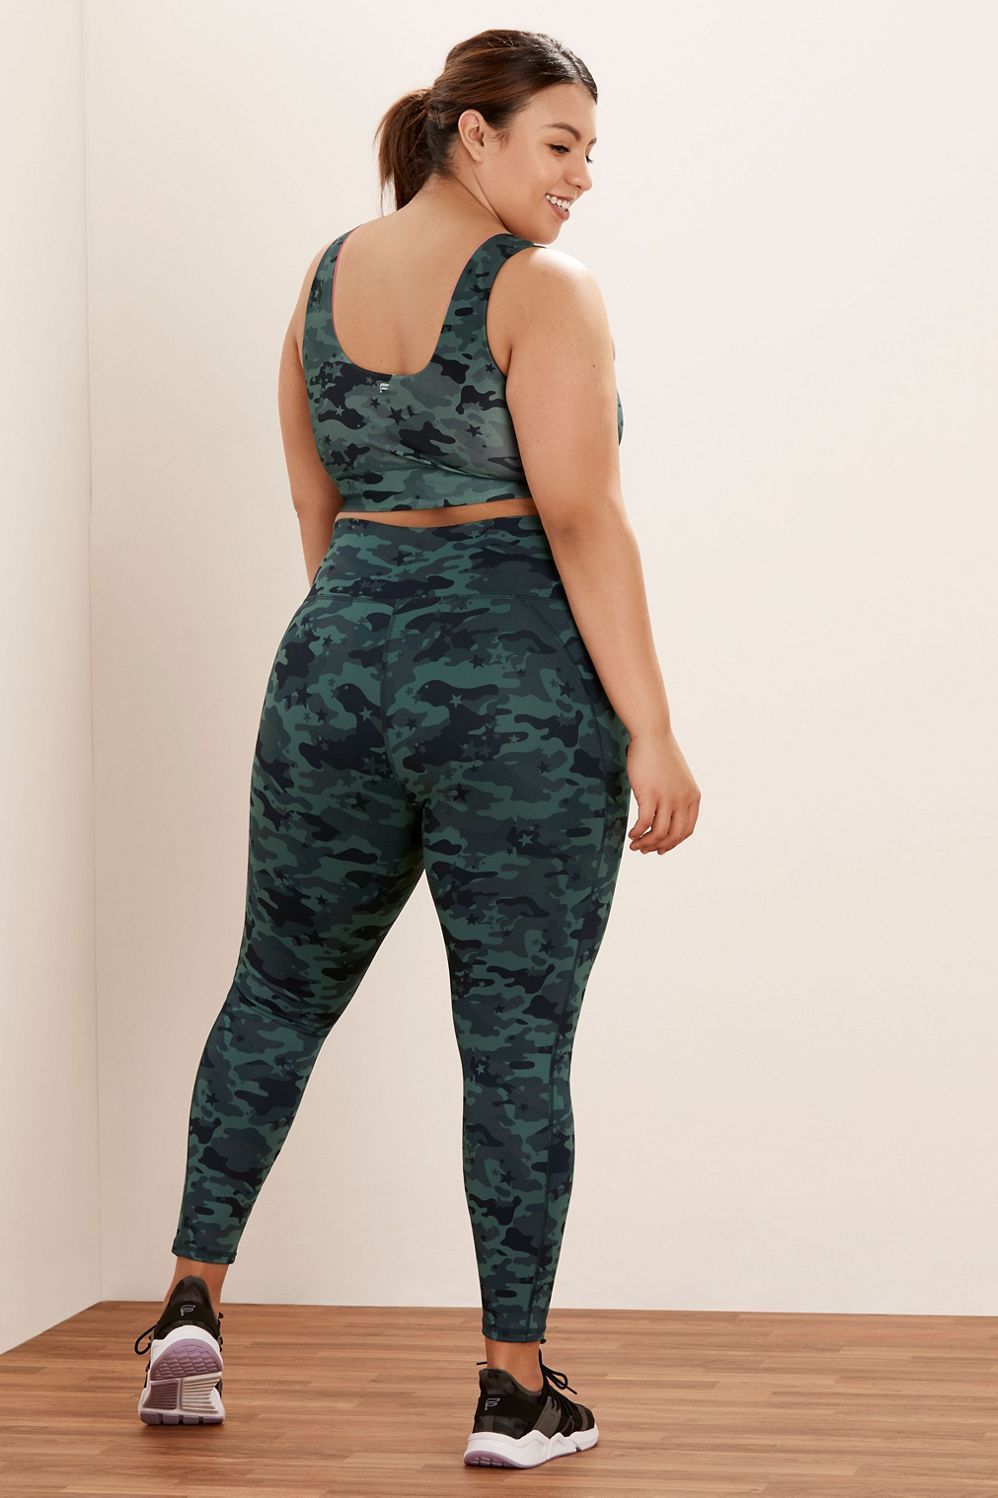 Sporty Staples: Solid Color Leggings for Active Girls - Chocolate – Soldier  Complex